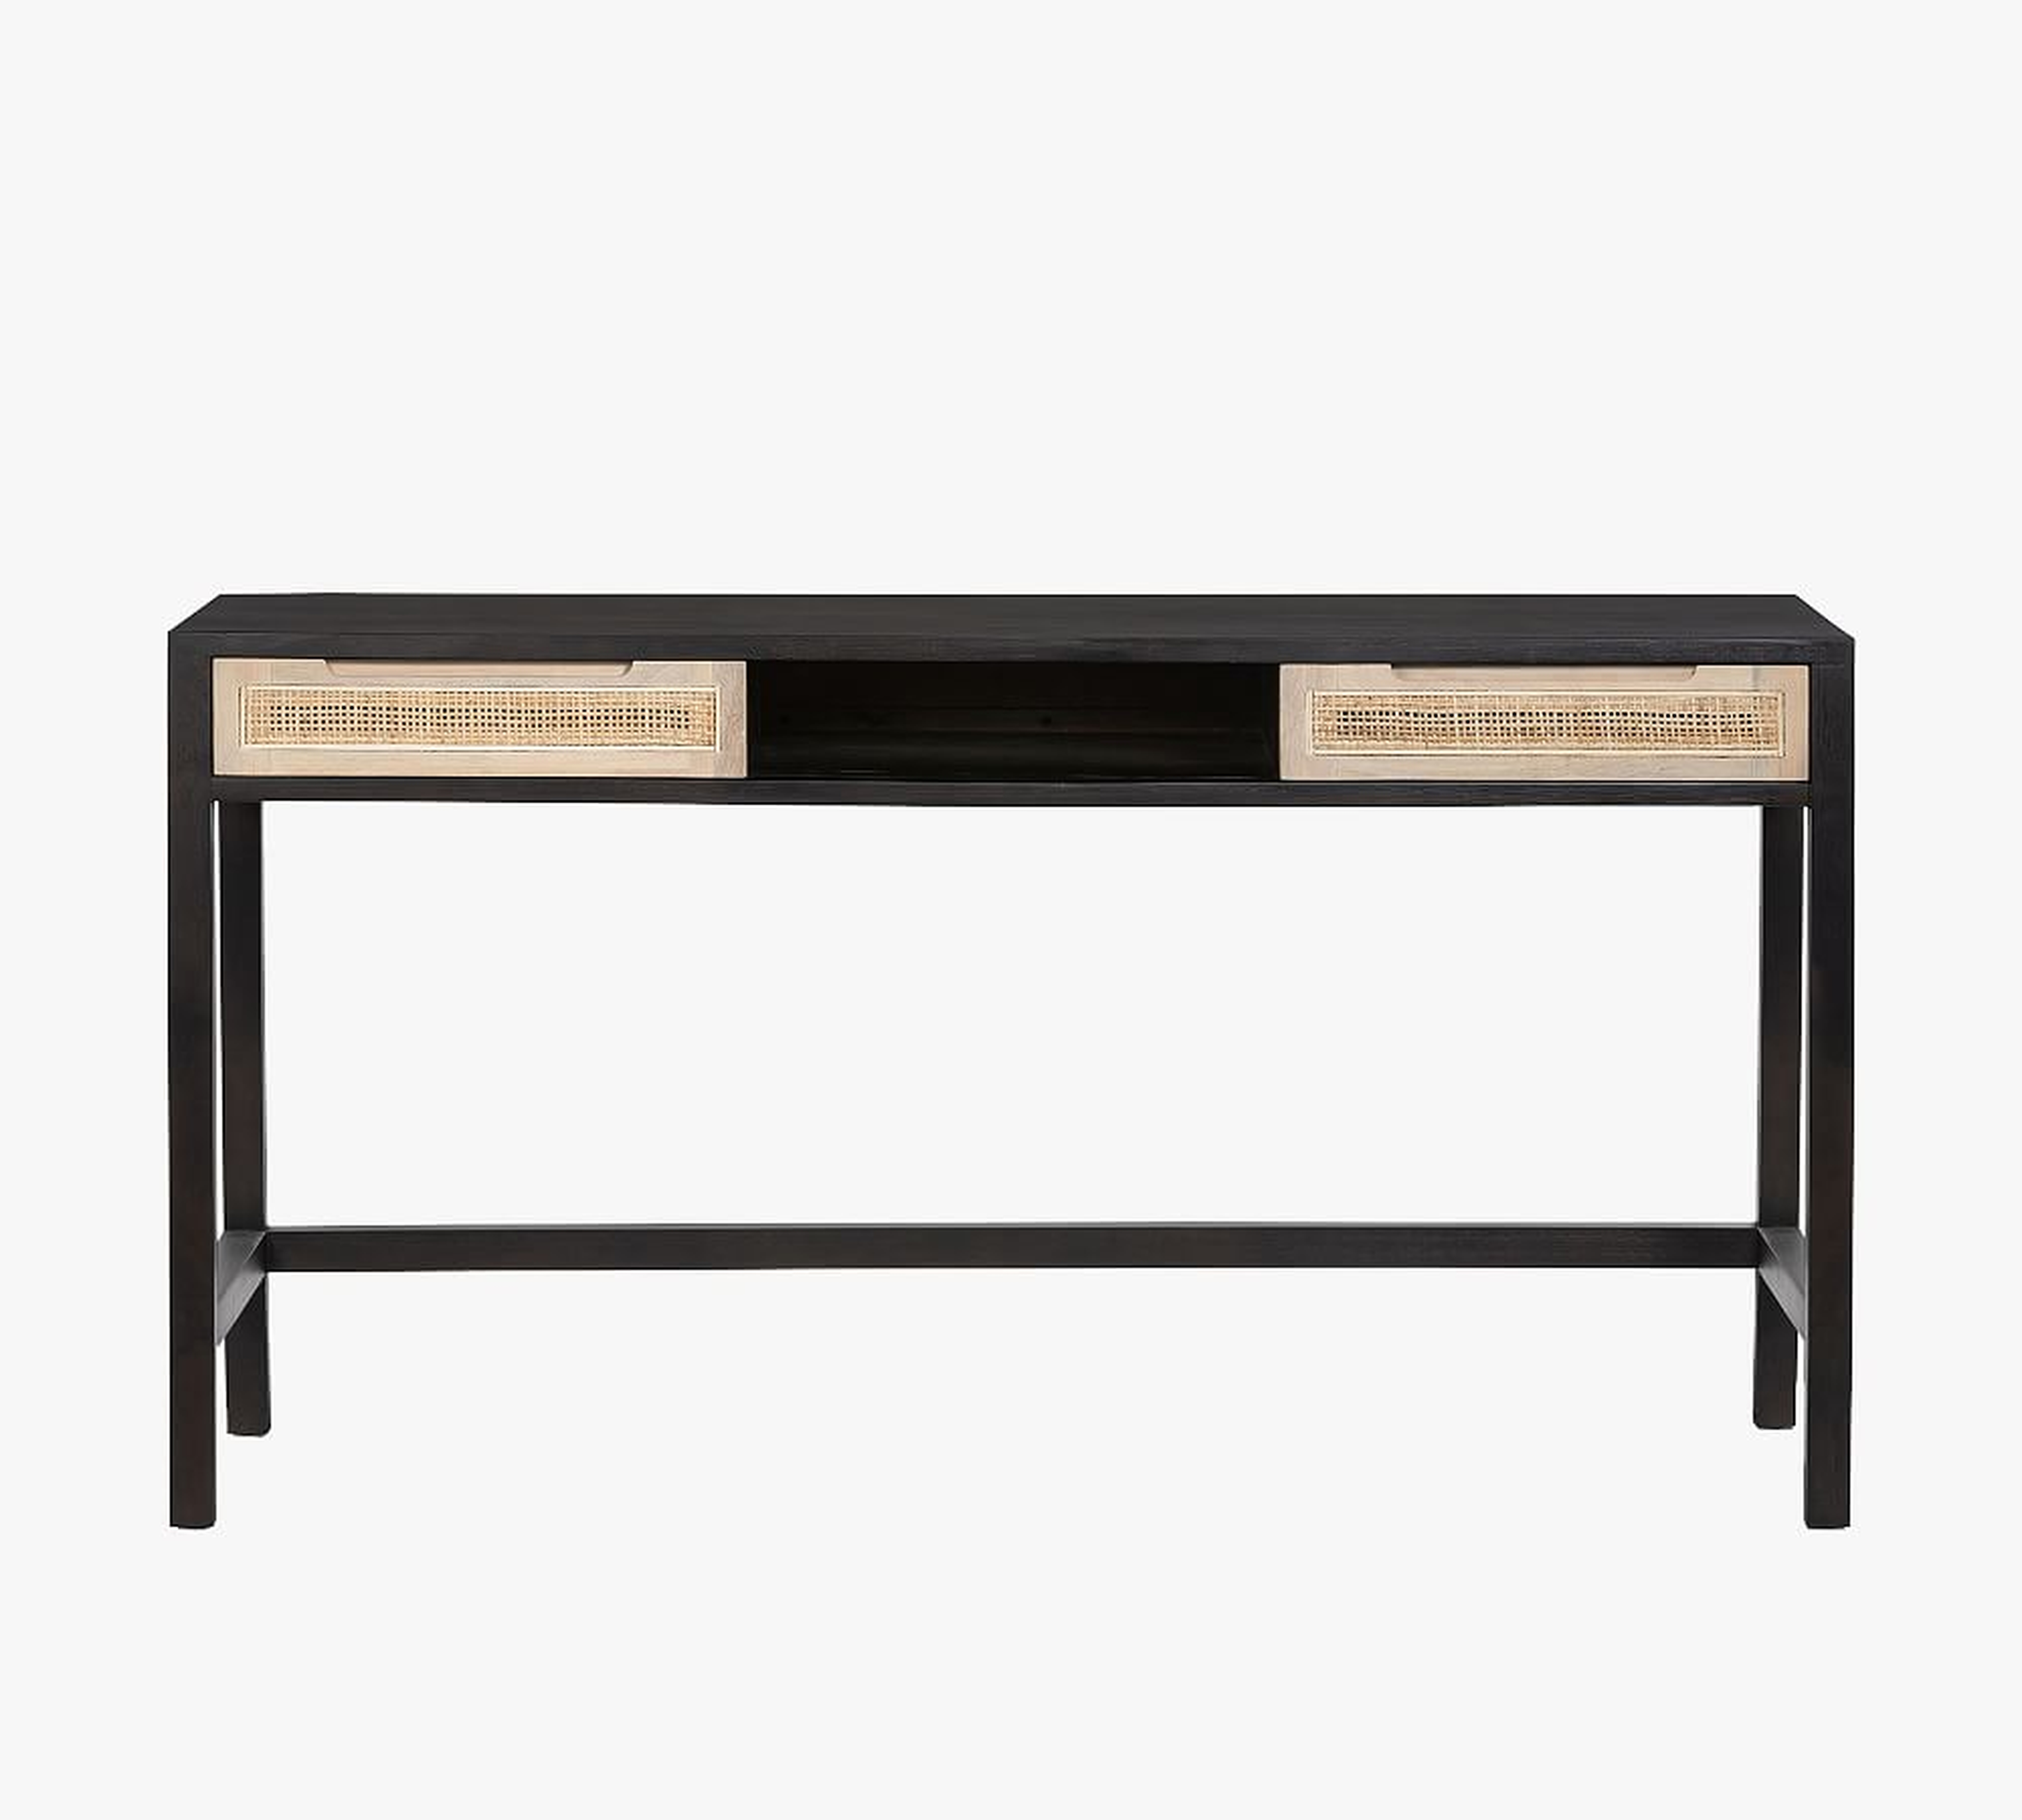 Dolores 58" Cane Writing Desk with Drawers, Black - Pottery Barn